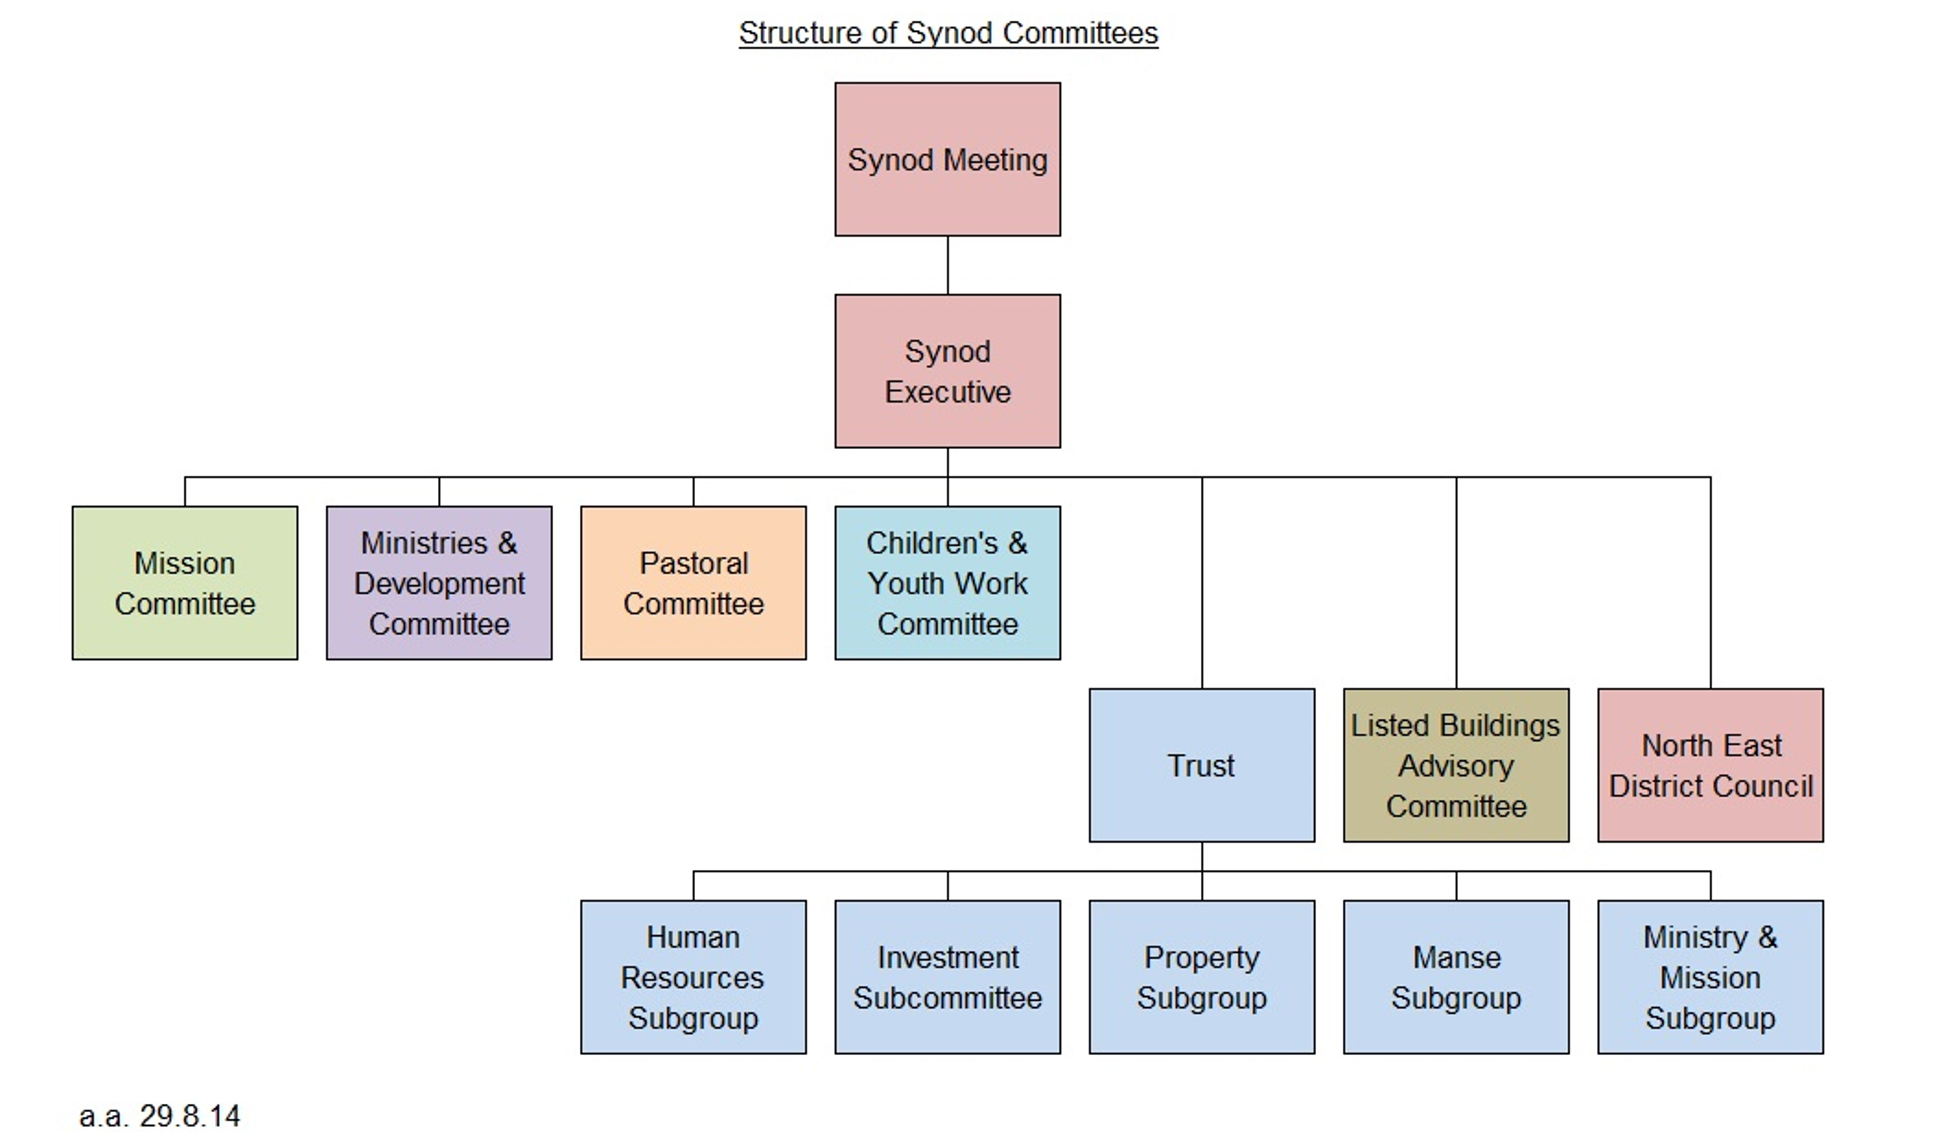 Structure of Synod Committees